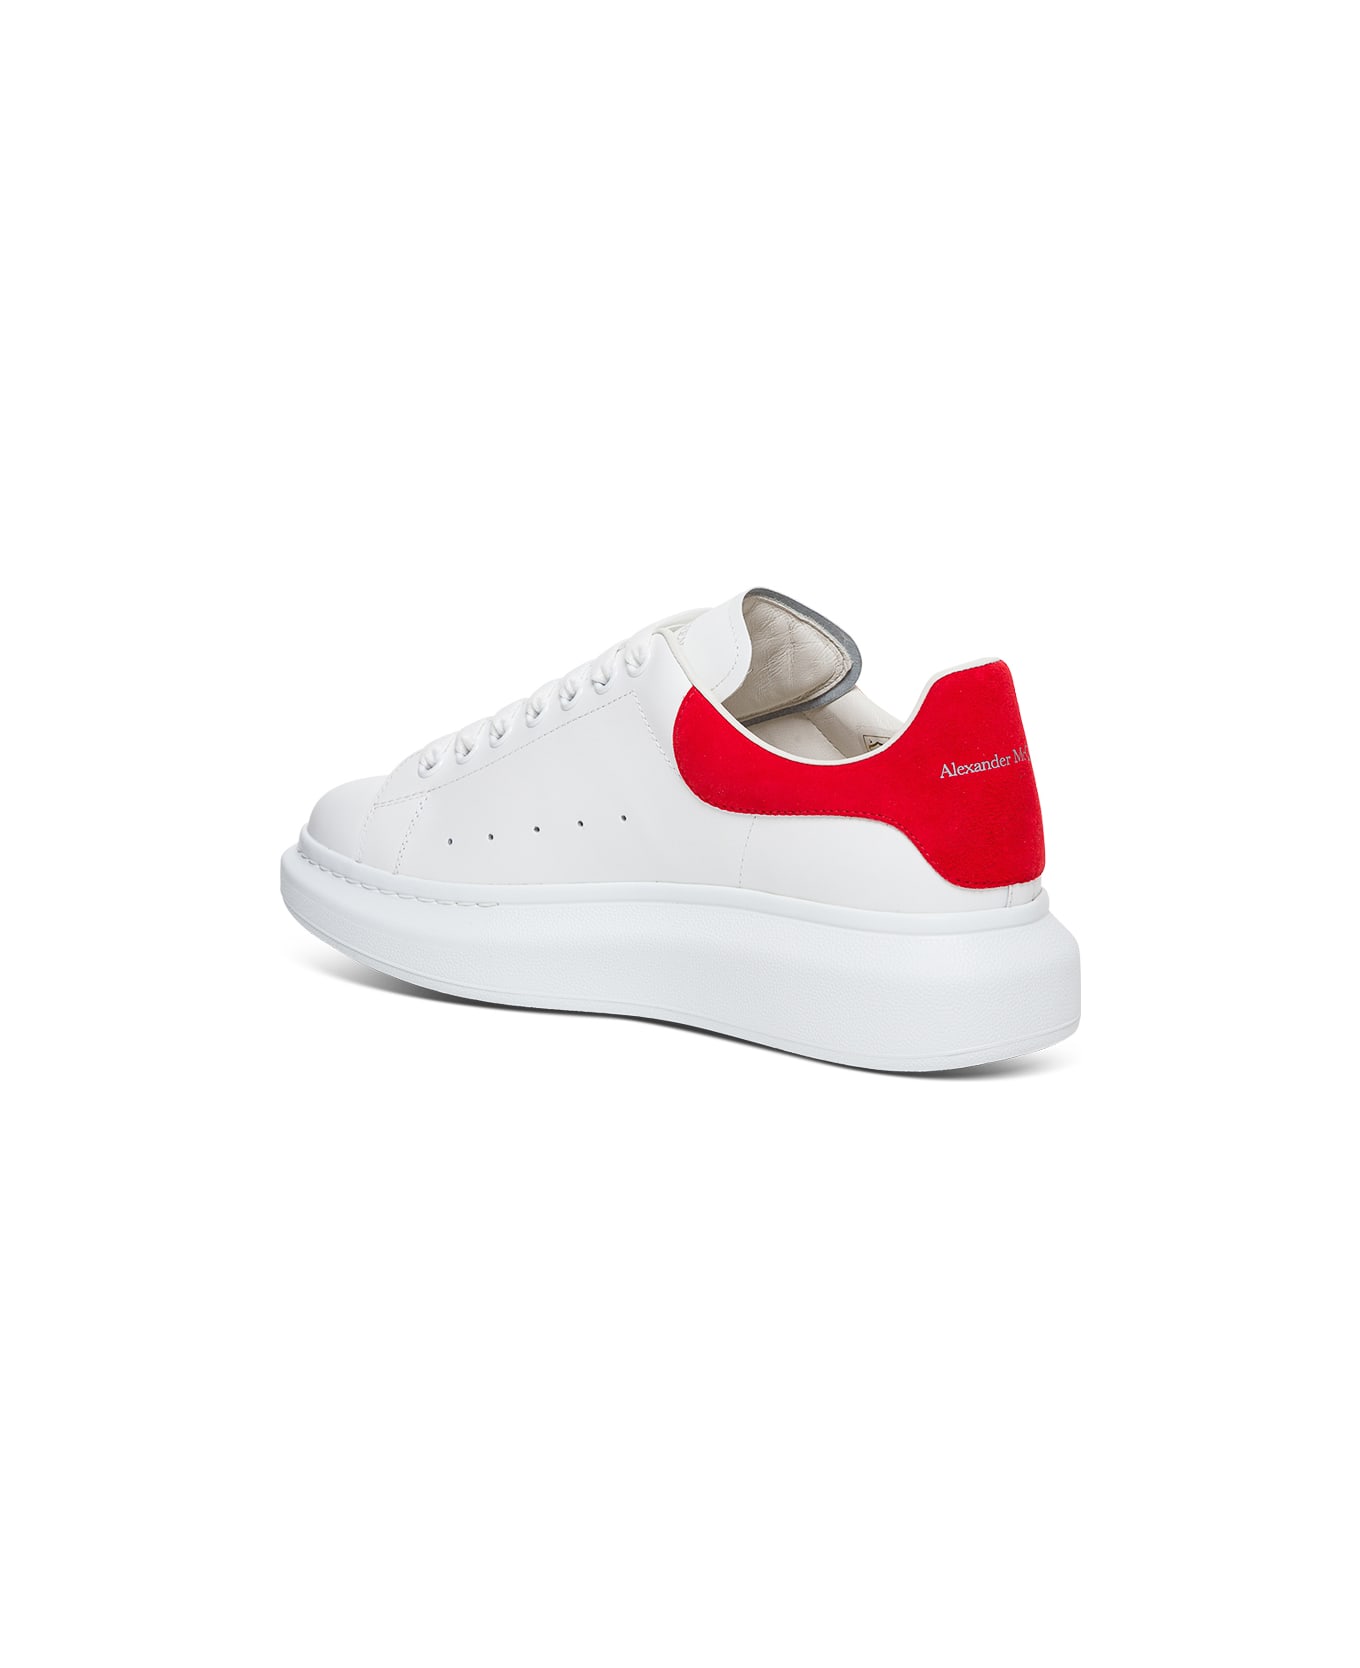 Alexander McQueen Oversize  White Leather Sneakers - White